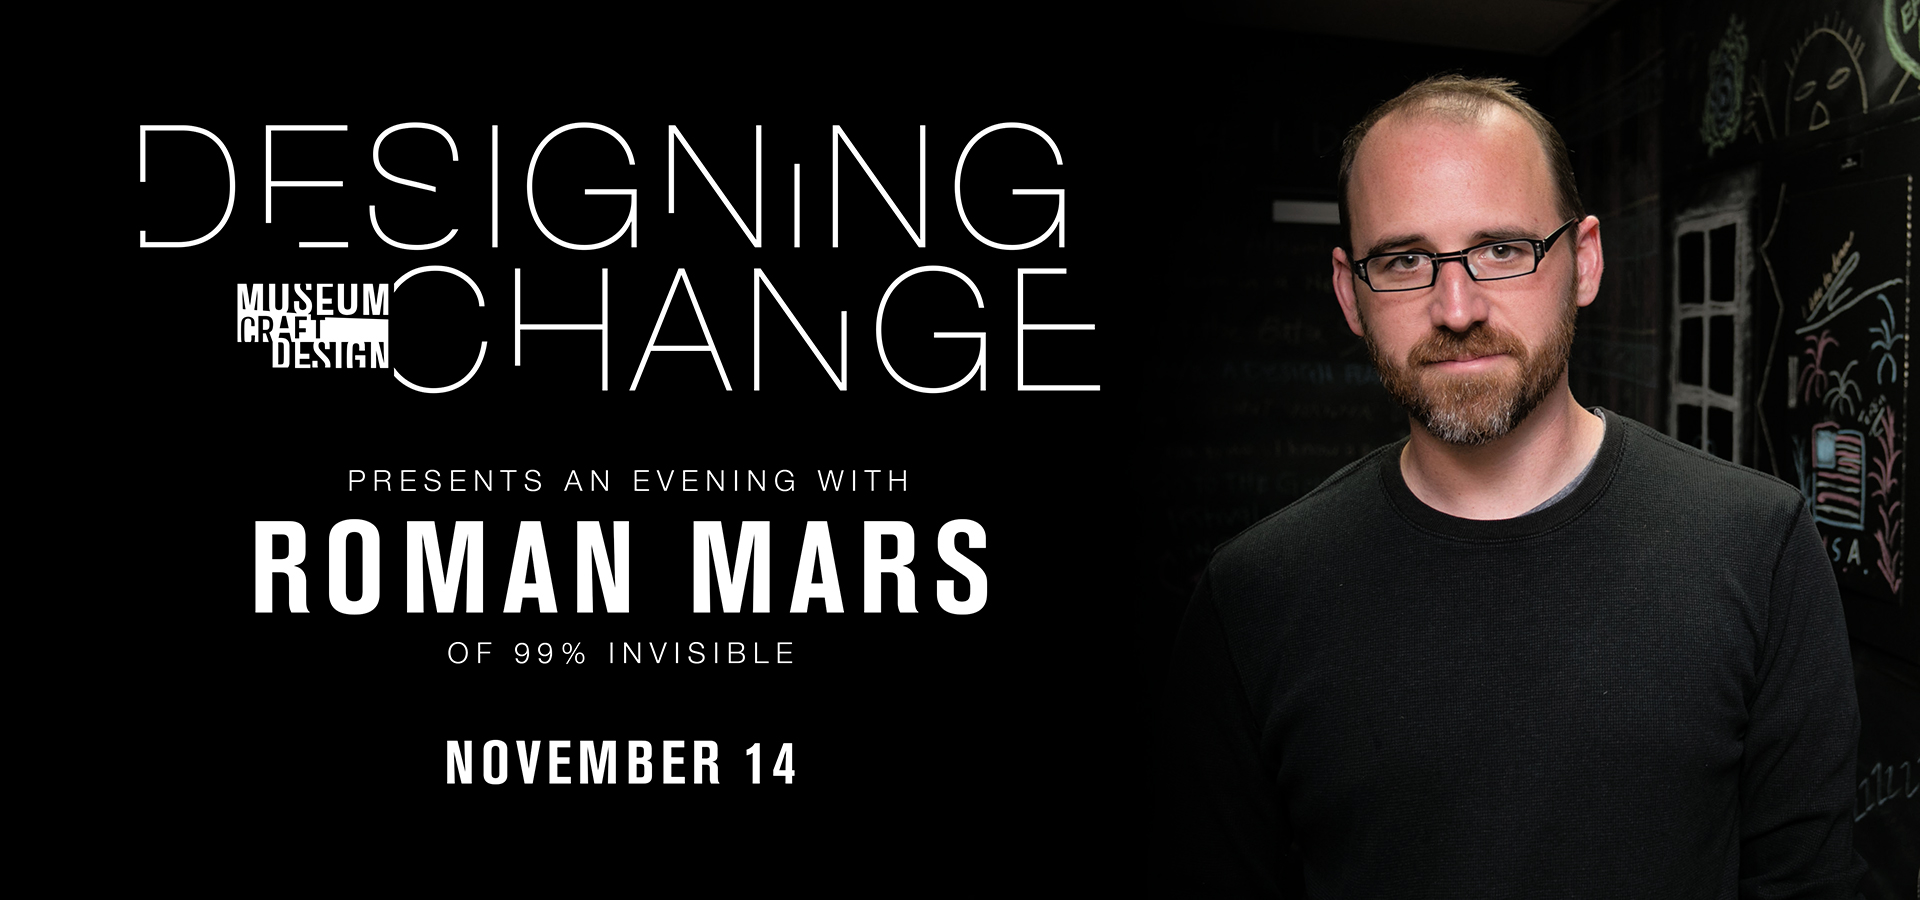 Designing Change graphic banner with head shot of Roman Mars for November 14, 2019 event